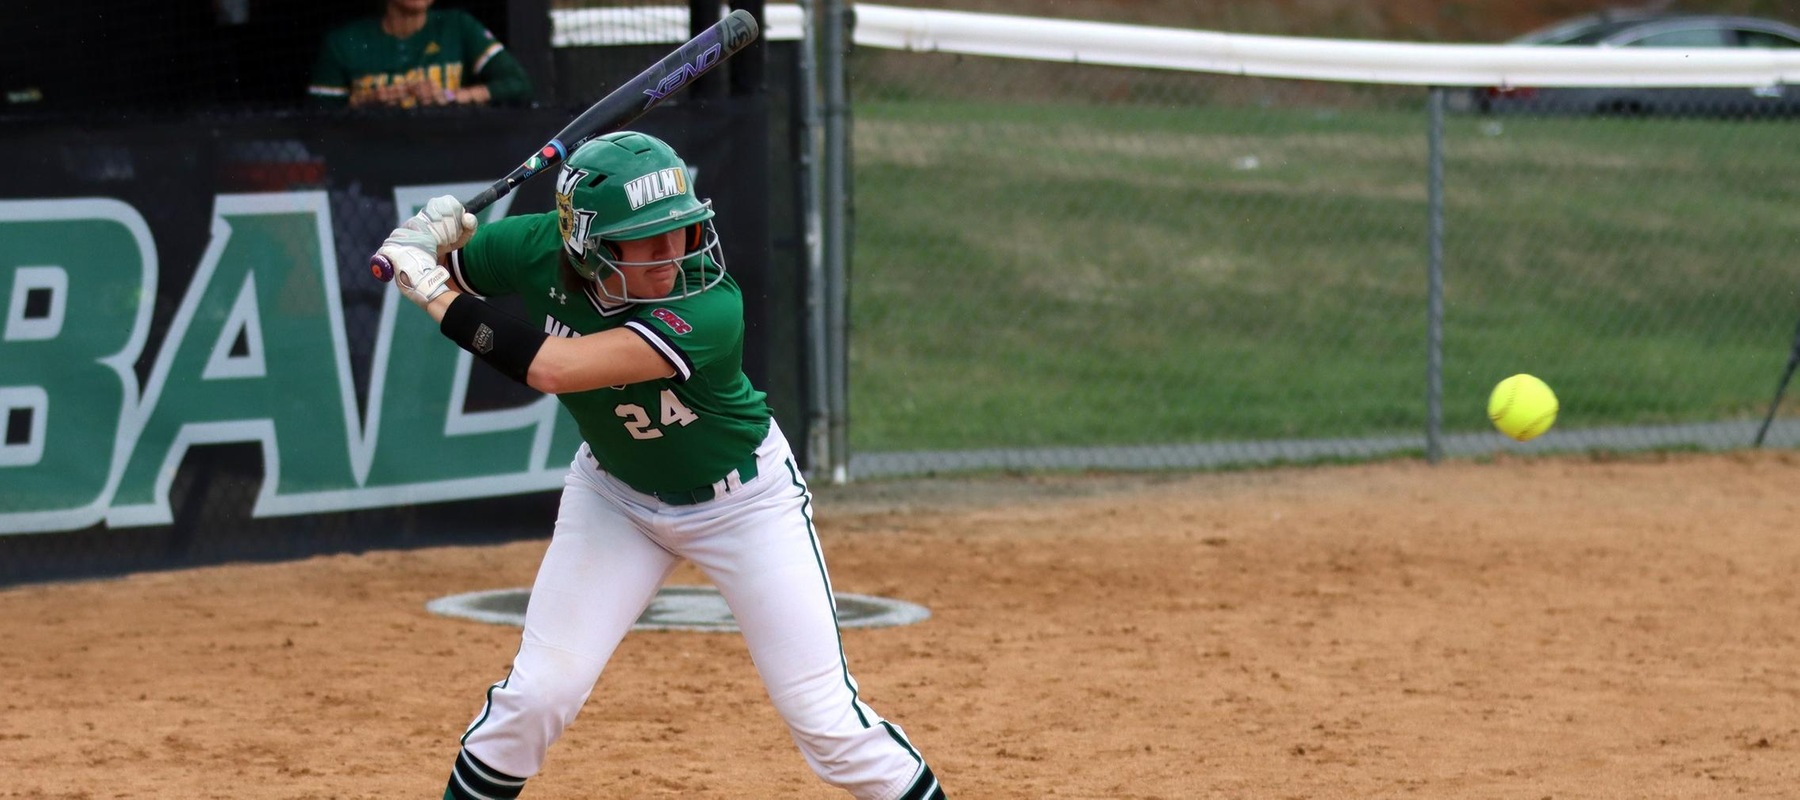 File photo of Emma Zimmerman who hit her first collegiate homer in game two against Georgian Court. Copyright 2022; Wilmington University. All rights reserved. Photo by Dan Lauletta. March 31, 2022 vs. Felician.